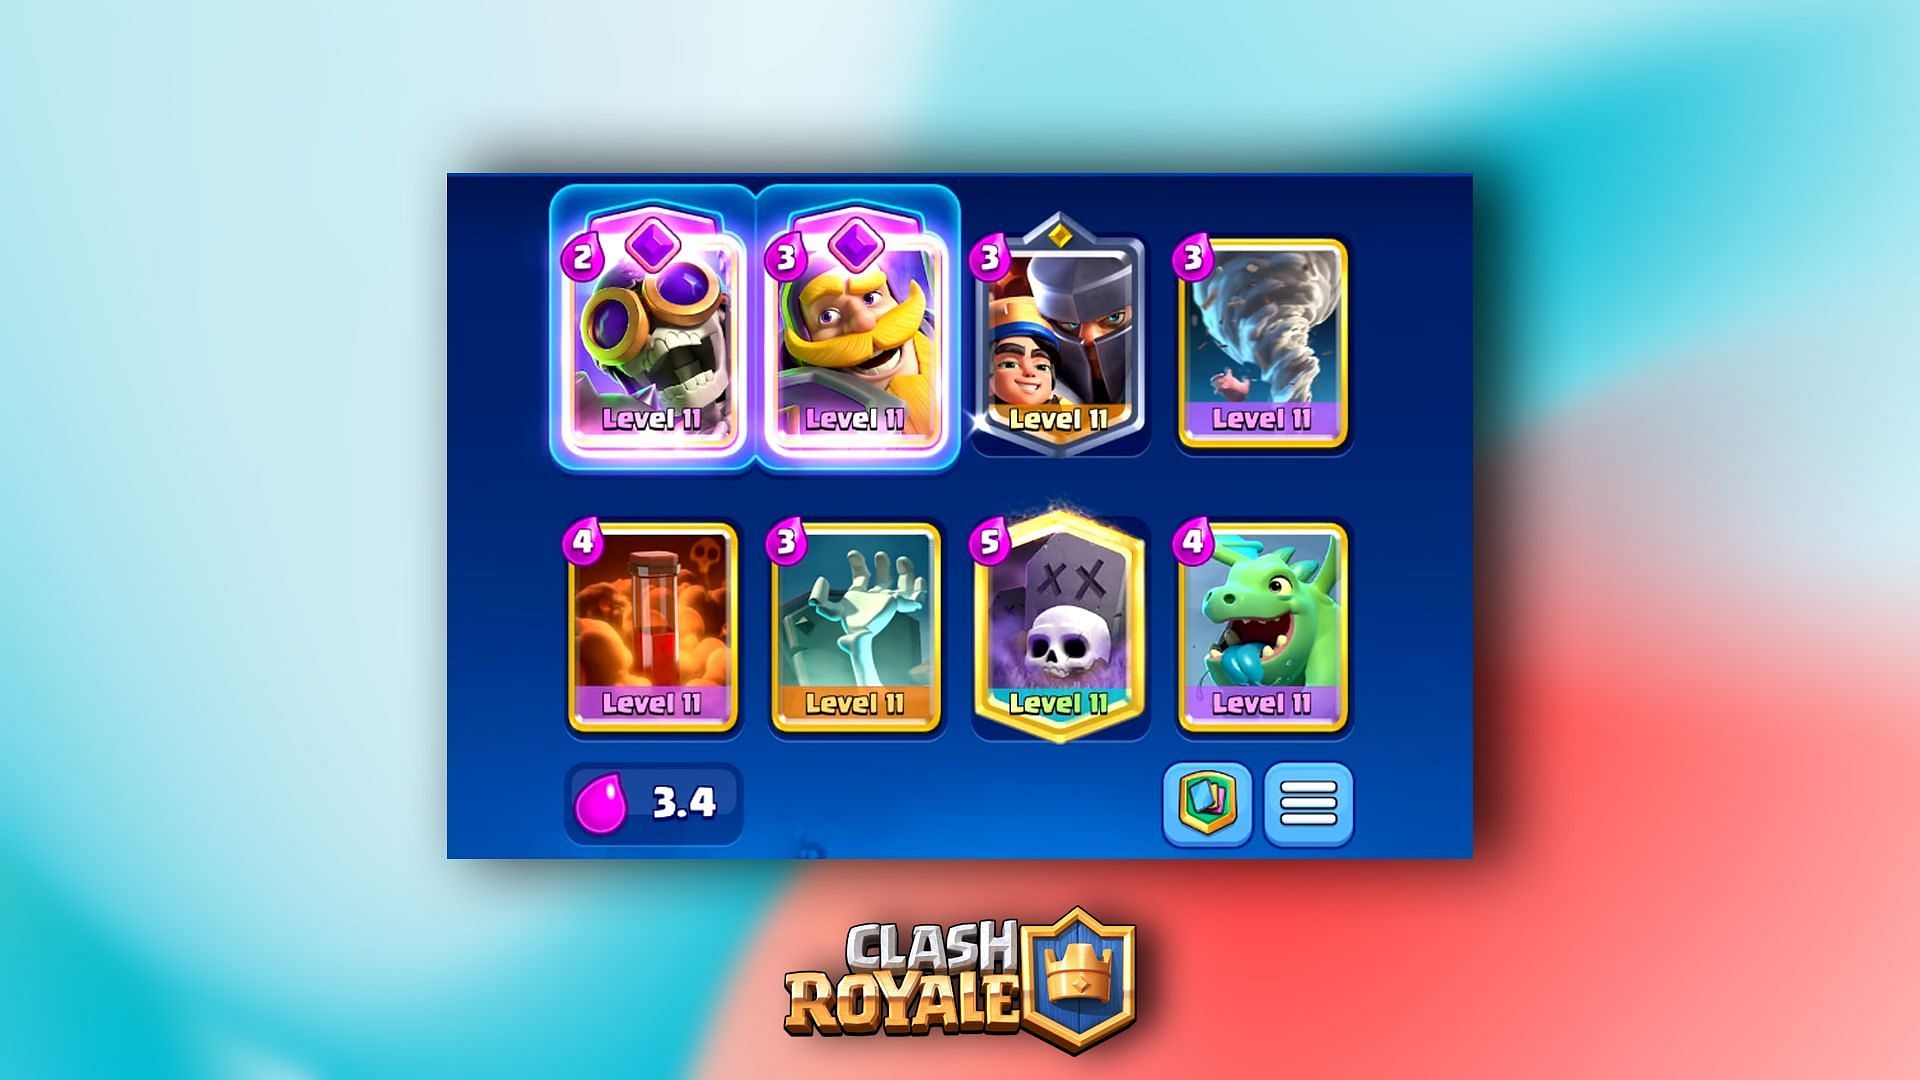 Splashyard is among the best clash royale decks for Arena 15 (Image via Supercell)